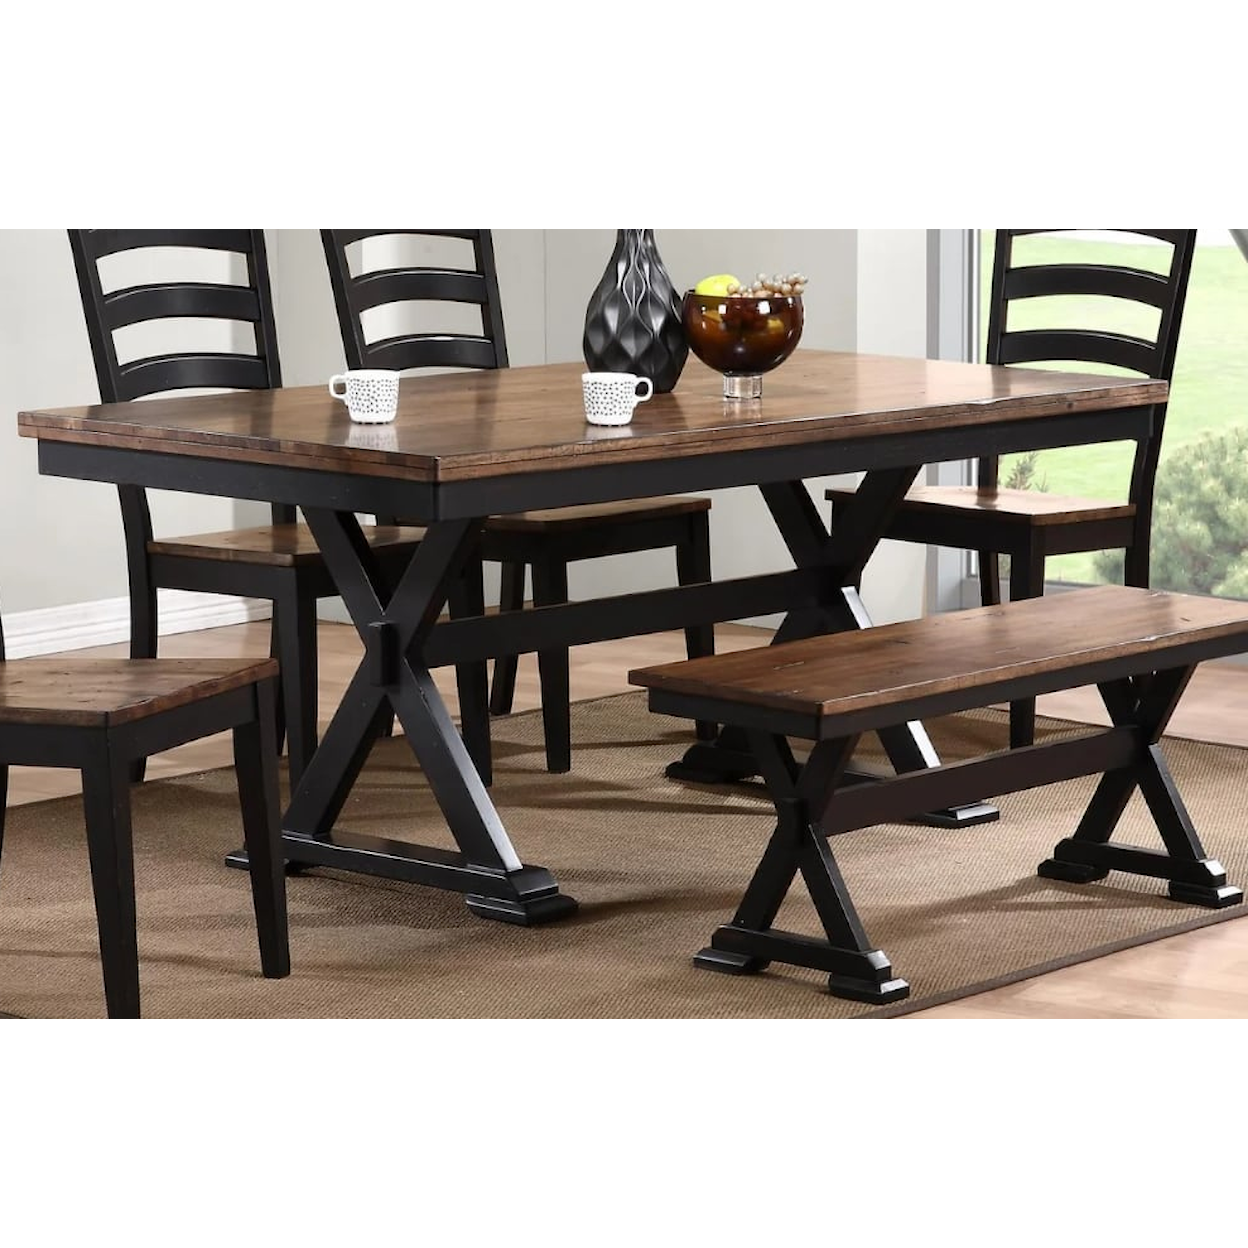 Urban Styles Oxford OXFORD BROWN AND BLACK DINING TABLE |